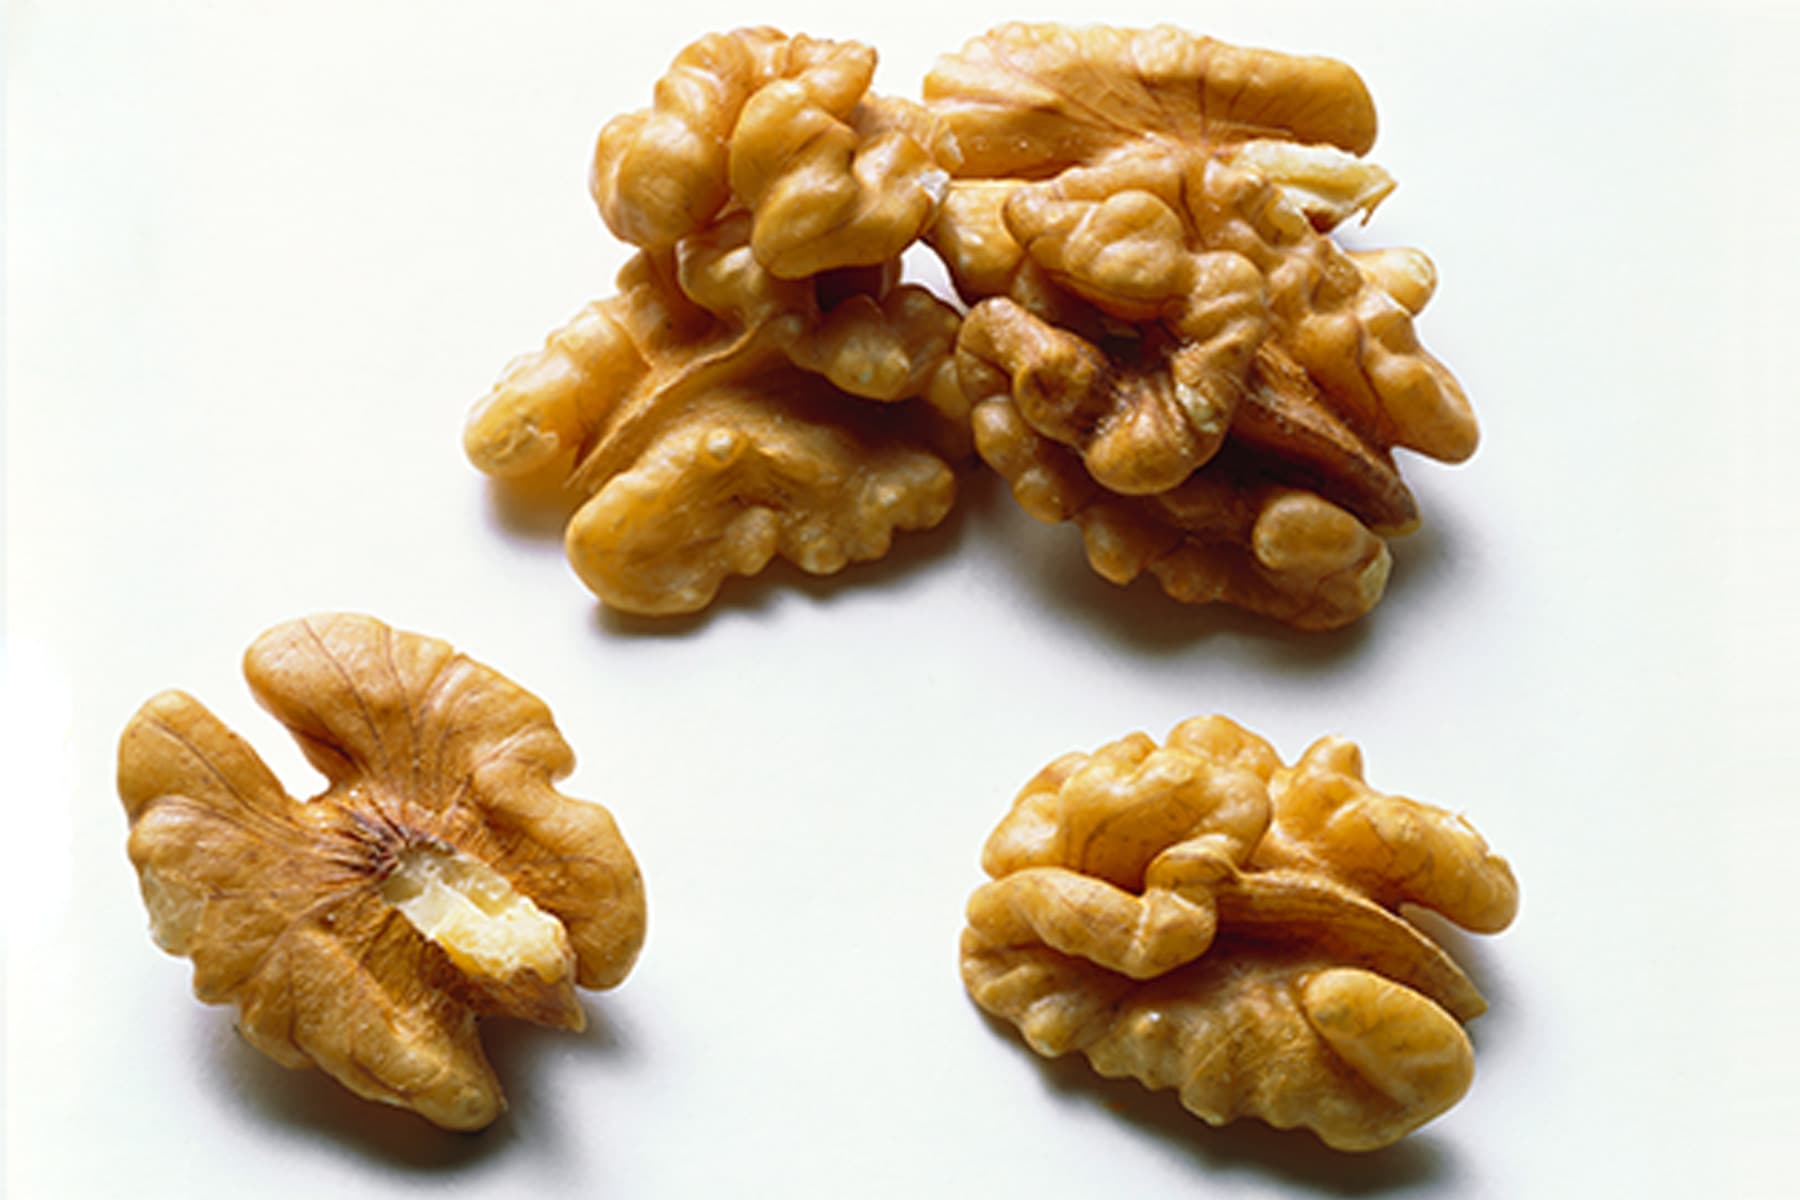 photo of Walnuts on table